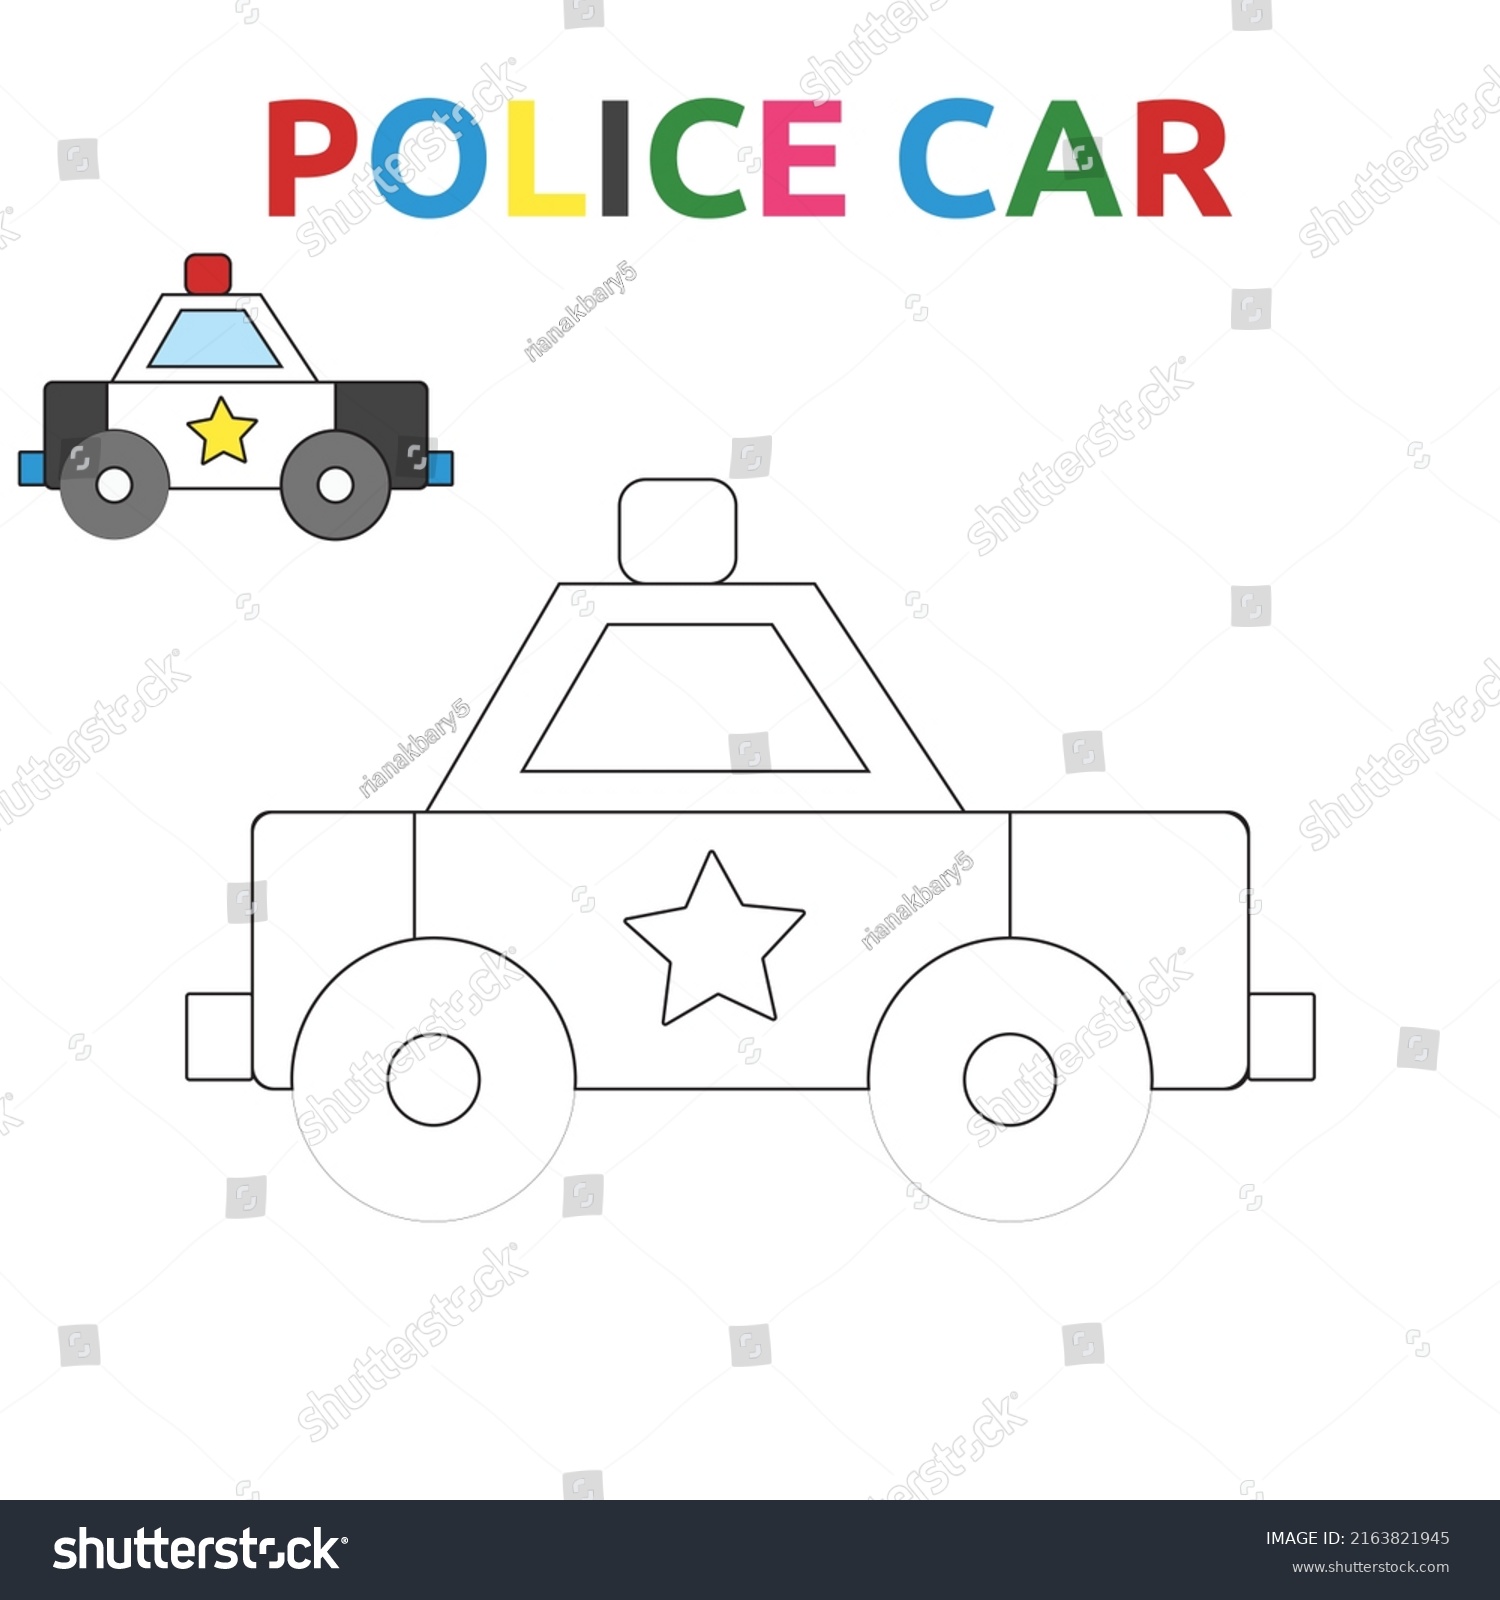 Police Car Coloring Page Illustration Coloring Stock Vector (Royalty ...